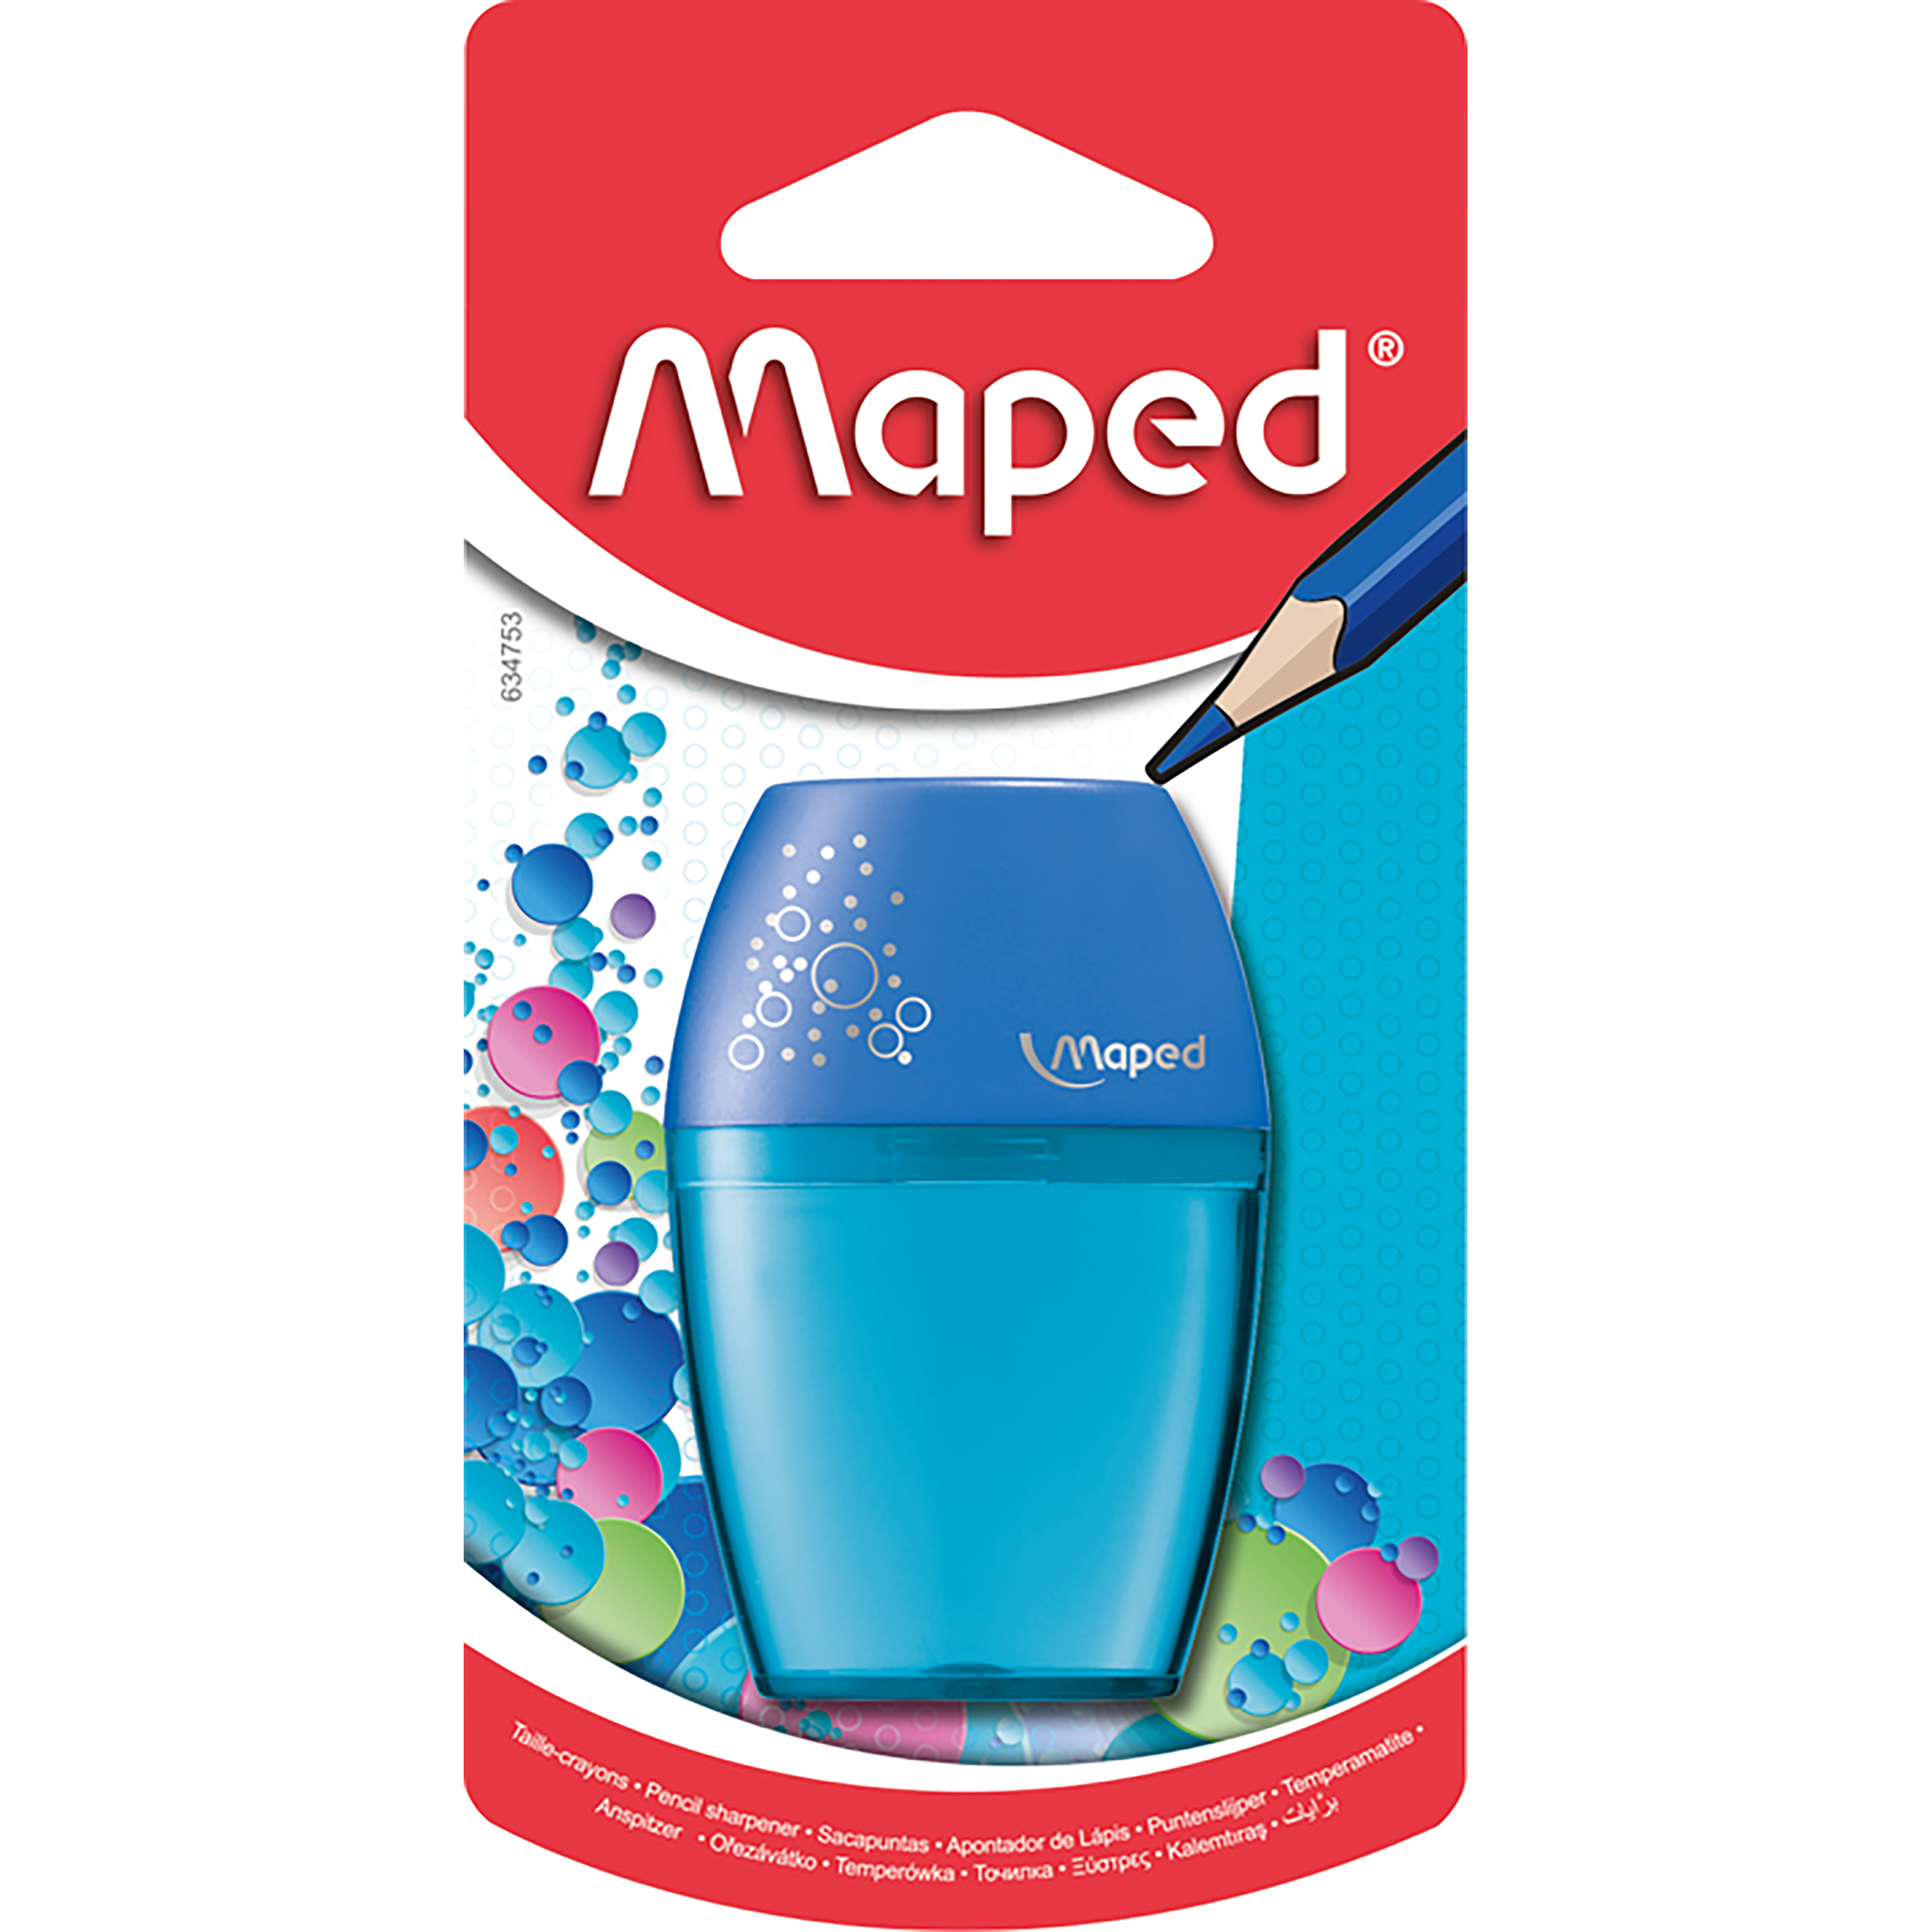 Maped Shaker Pencil Sharpeners – Workplace Warehouse